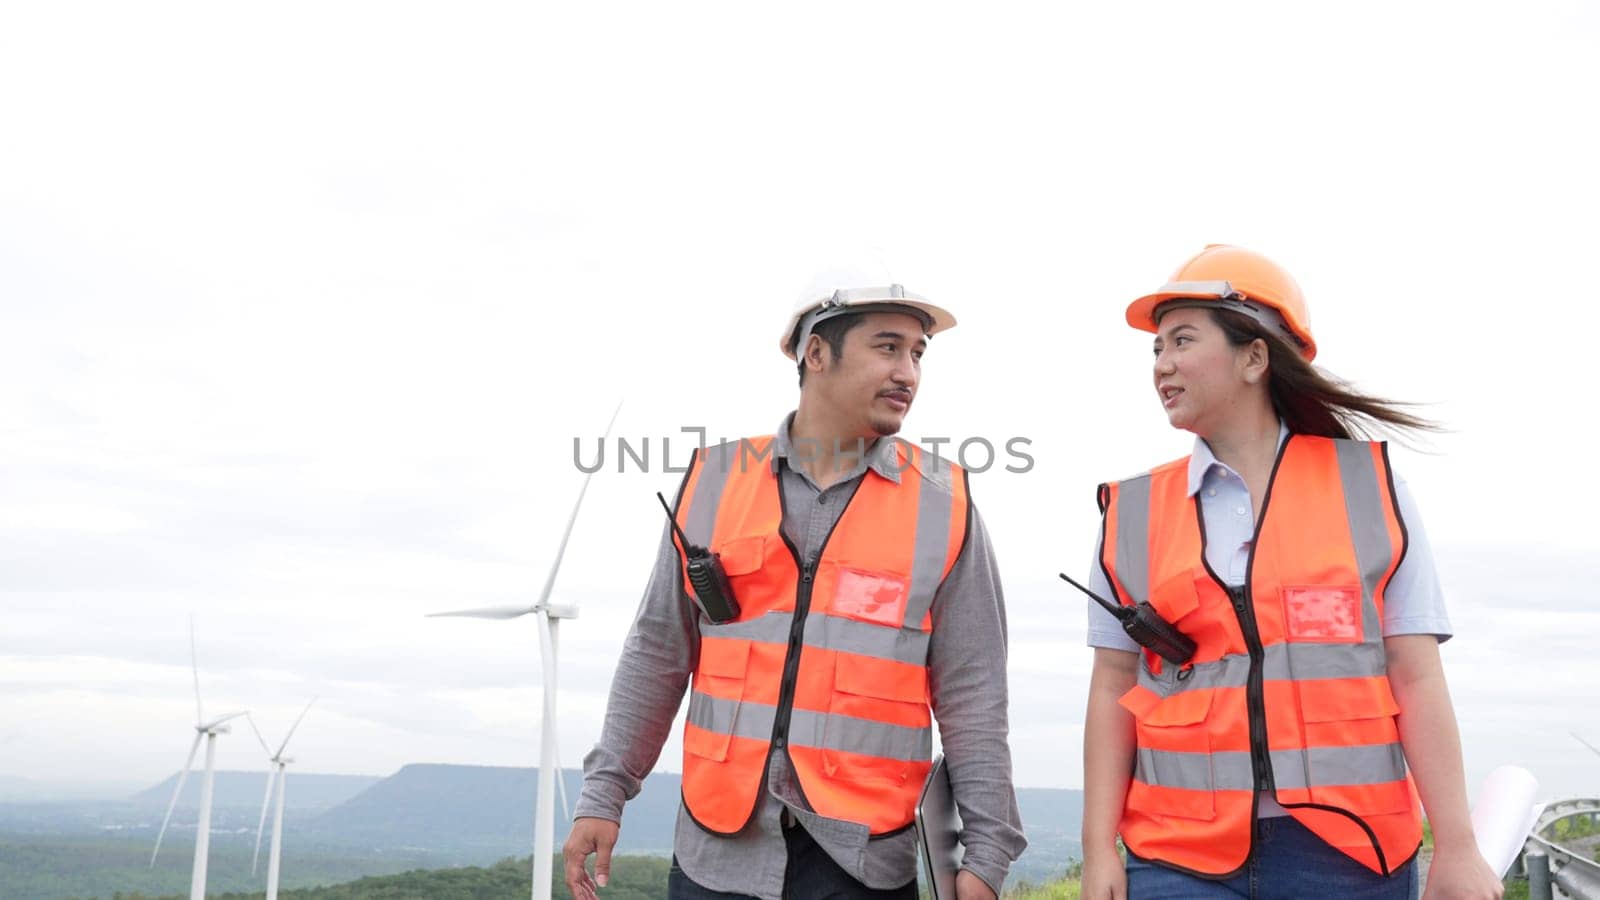 Male and female engineers working on a wind farm atop a hill or mountain in the rural. Progressive ideal for the future production of renewable, sustainable energy.